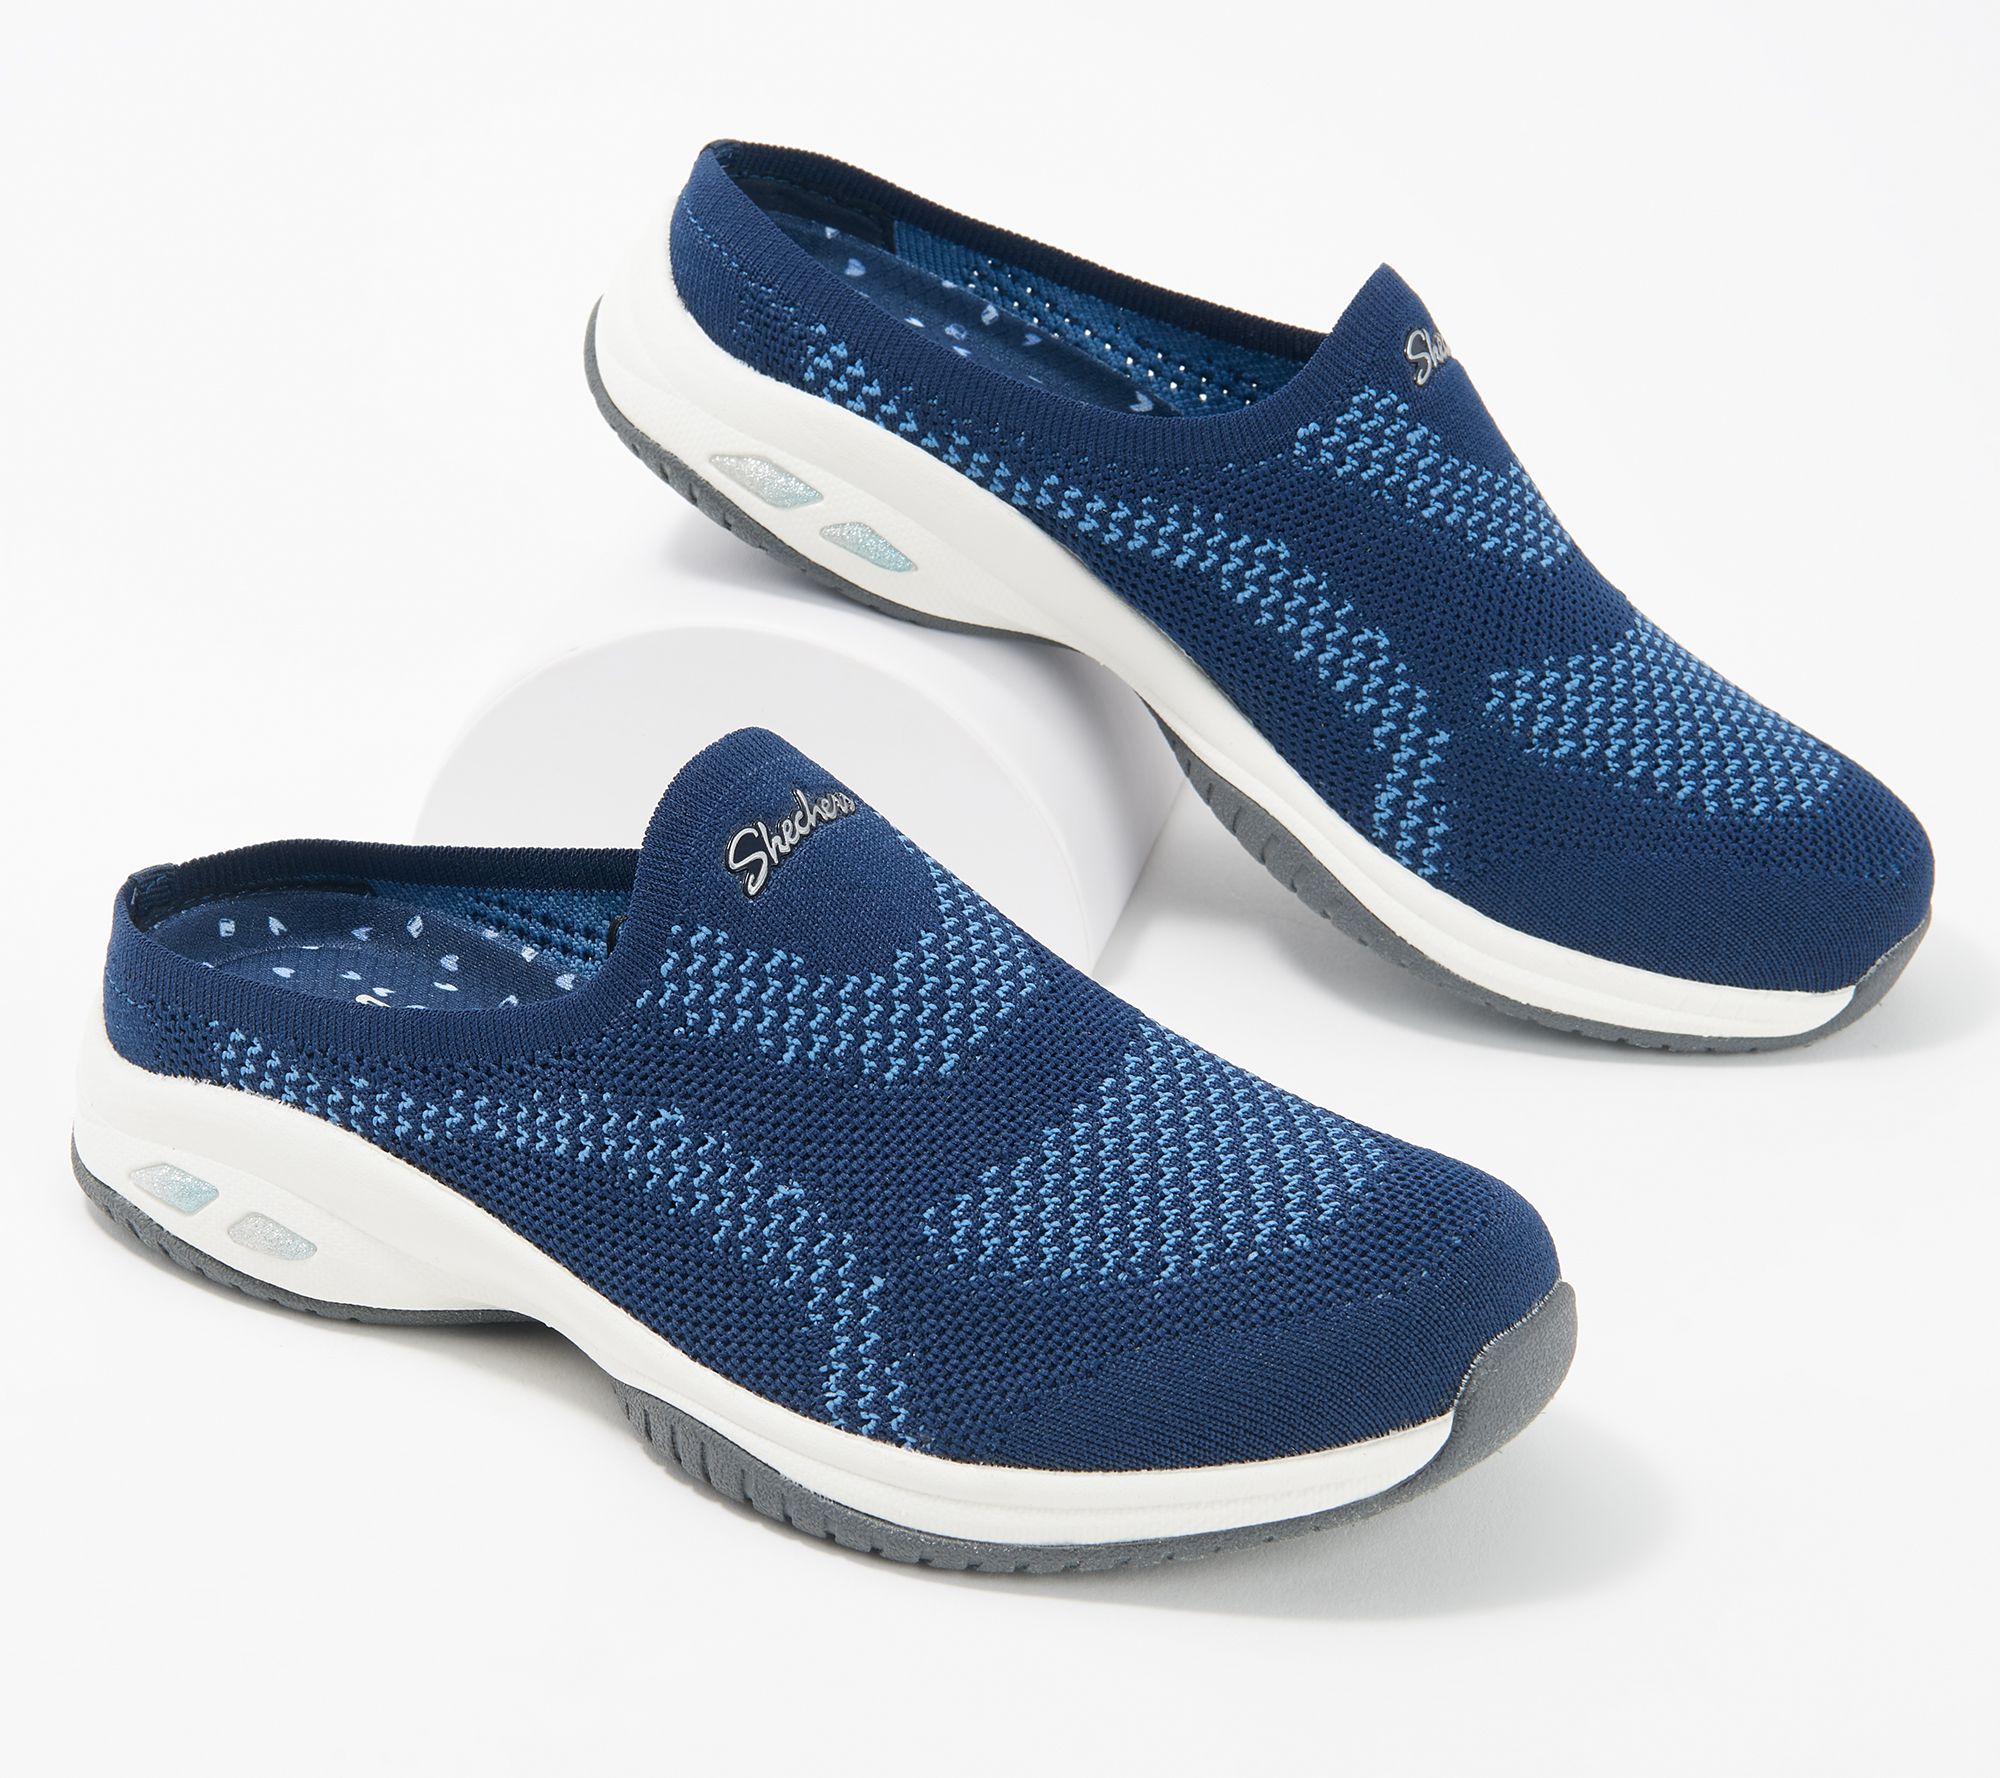 Skechers Commute Time Washable Knit Mules In Knit to Win - QVC.com